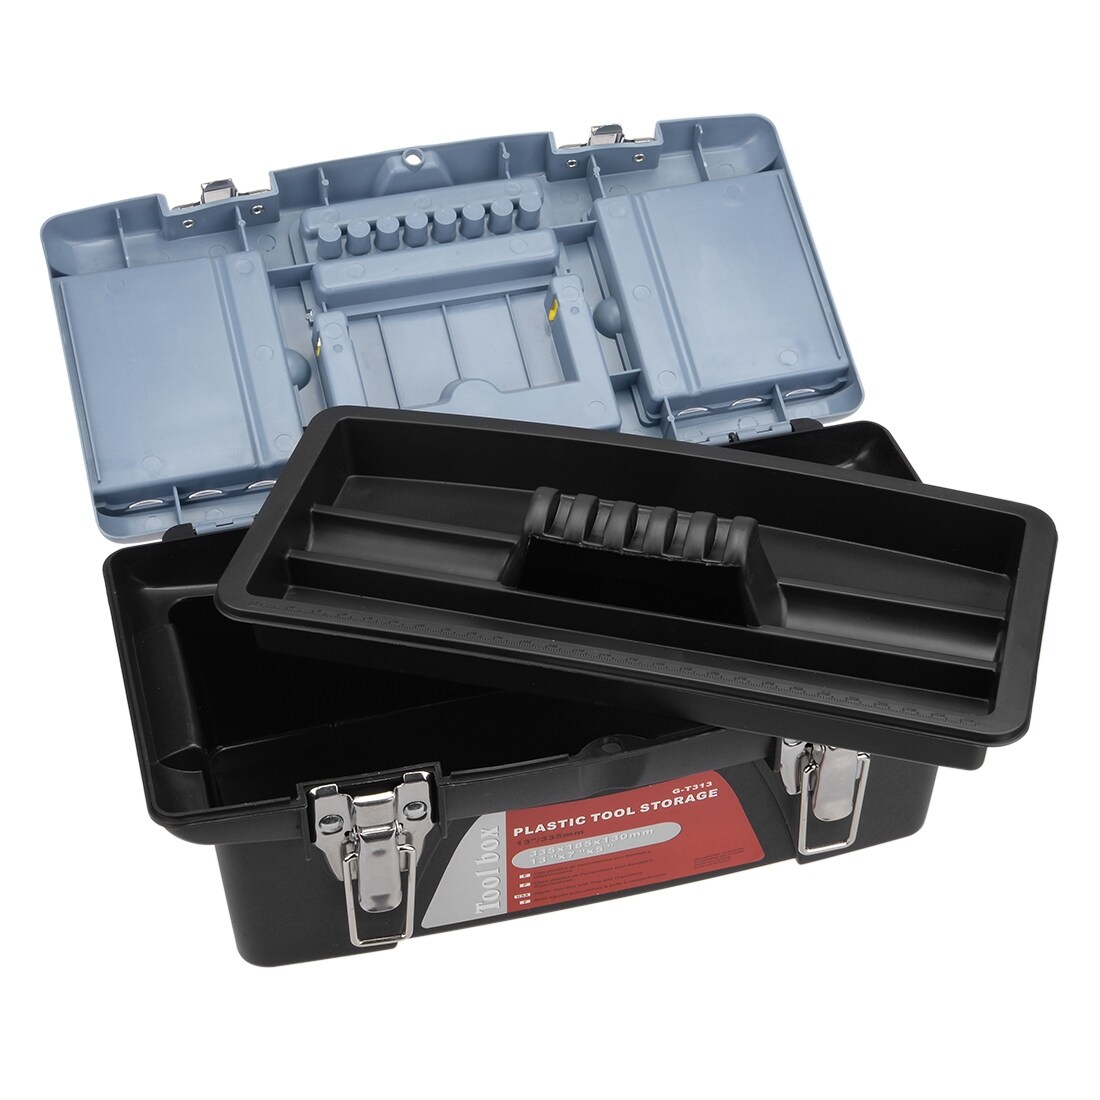 12-inch Tool Box with Tray and Organizers Includes Three Small Parts Boxes